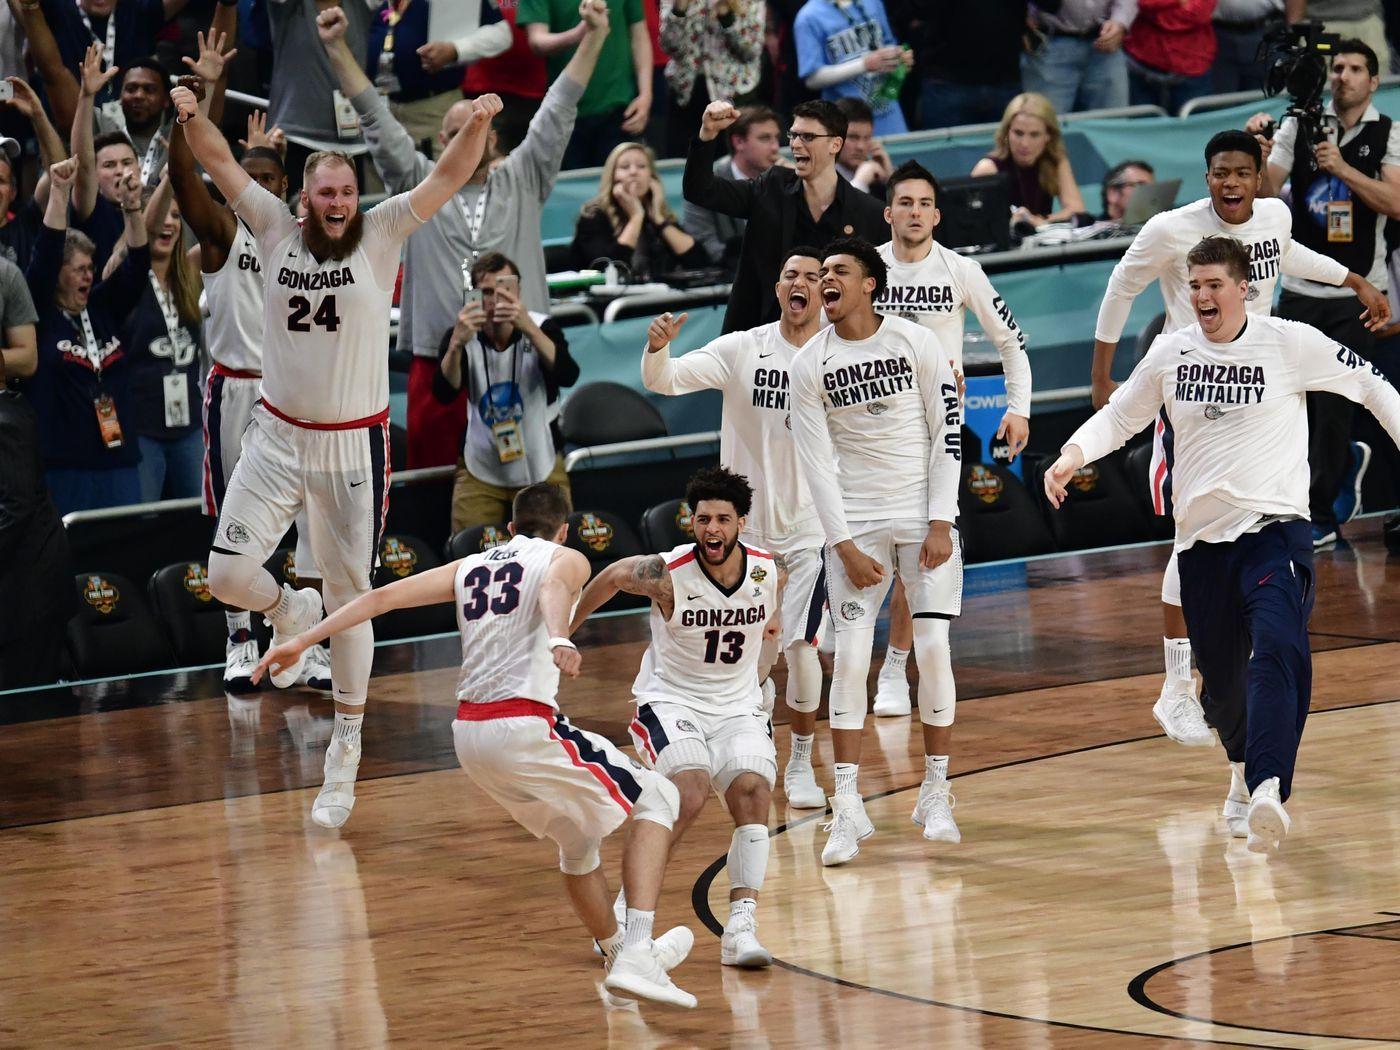 Where is Gonzaga located? And other quick facts about the NCAA